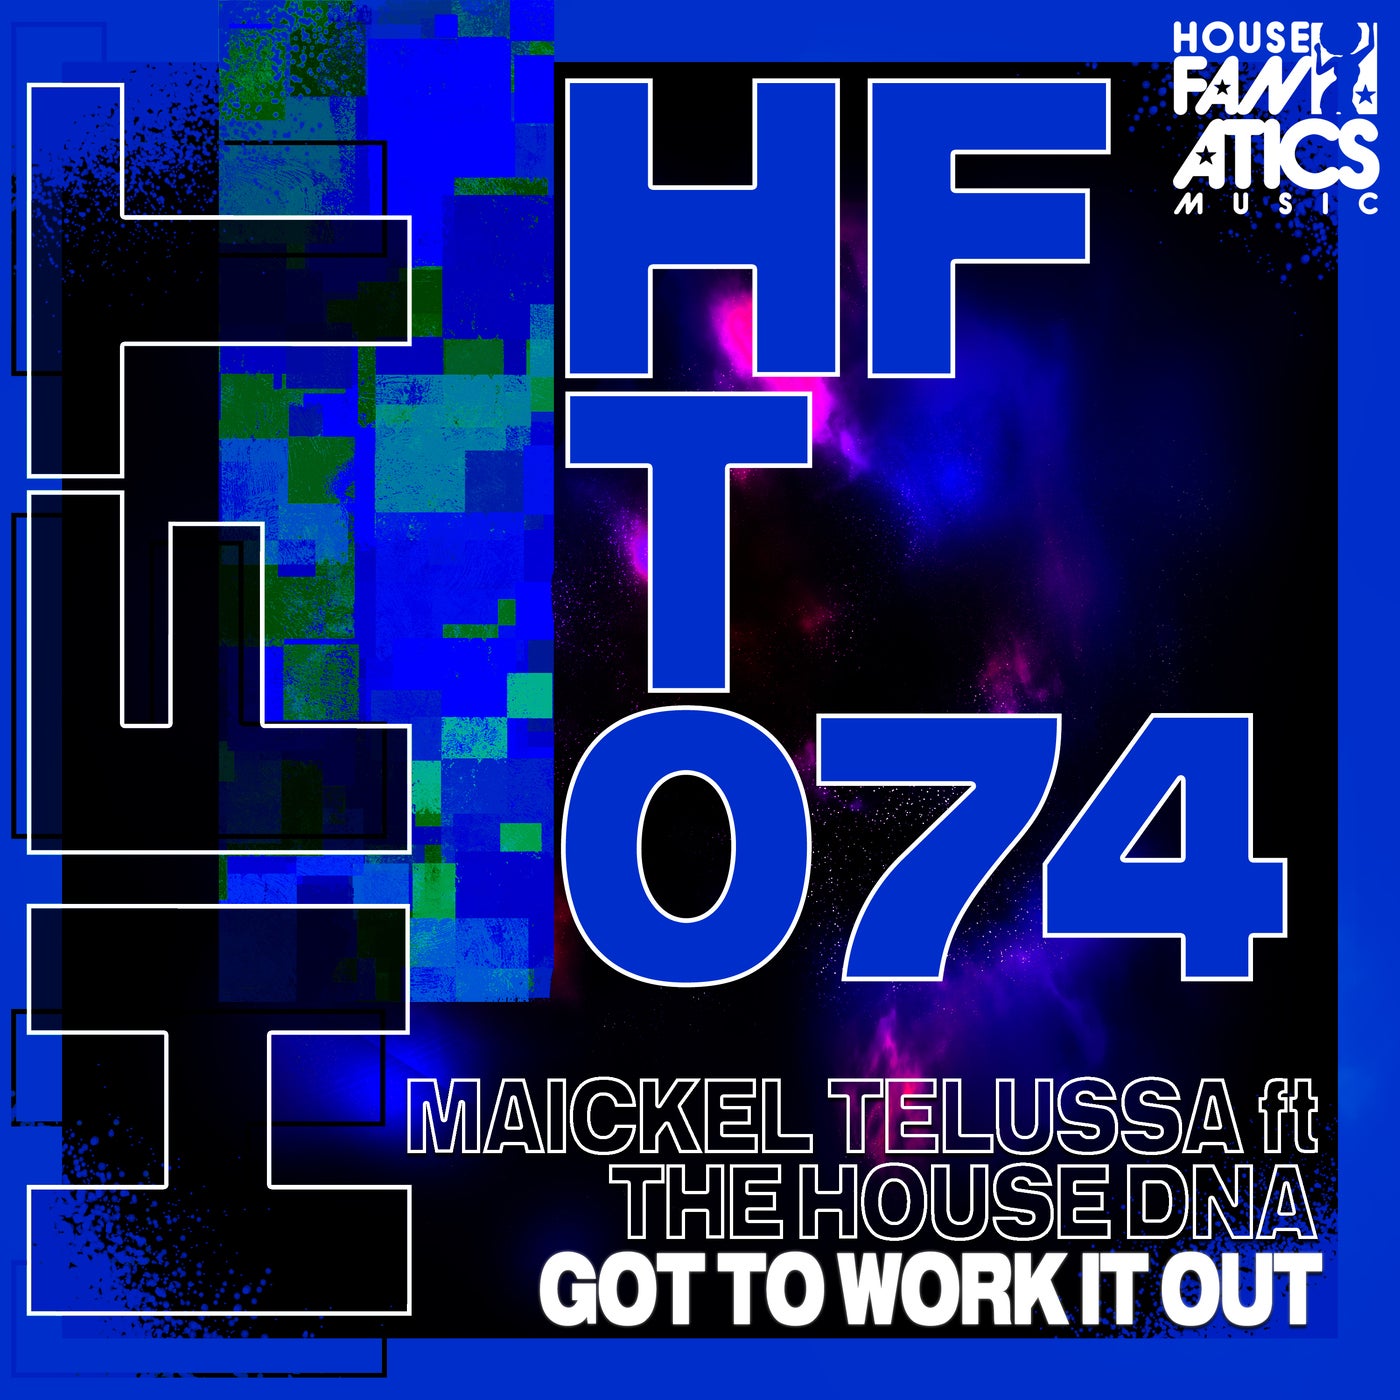 Maickel Telussa & The House DNA - Got to Work It Out on HouseFanatics Music